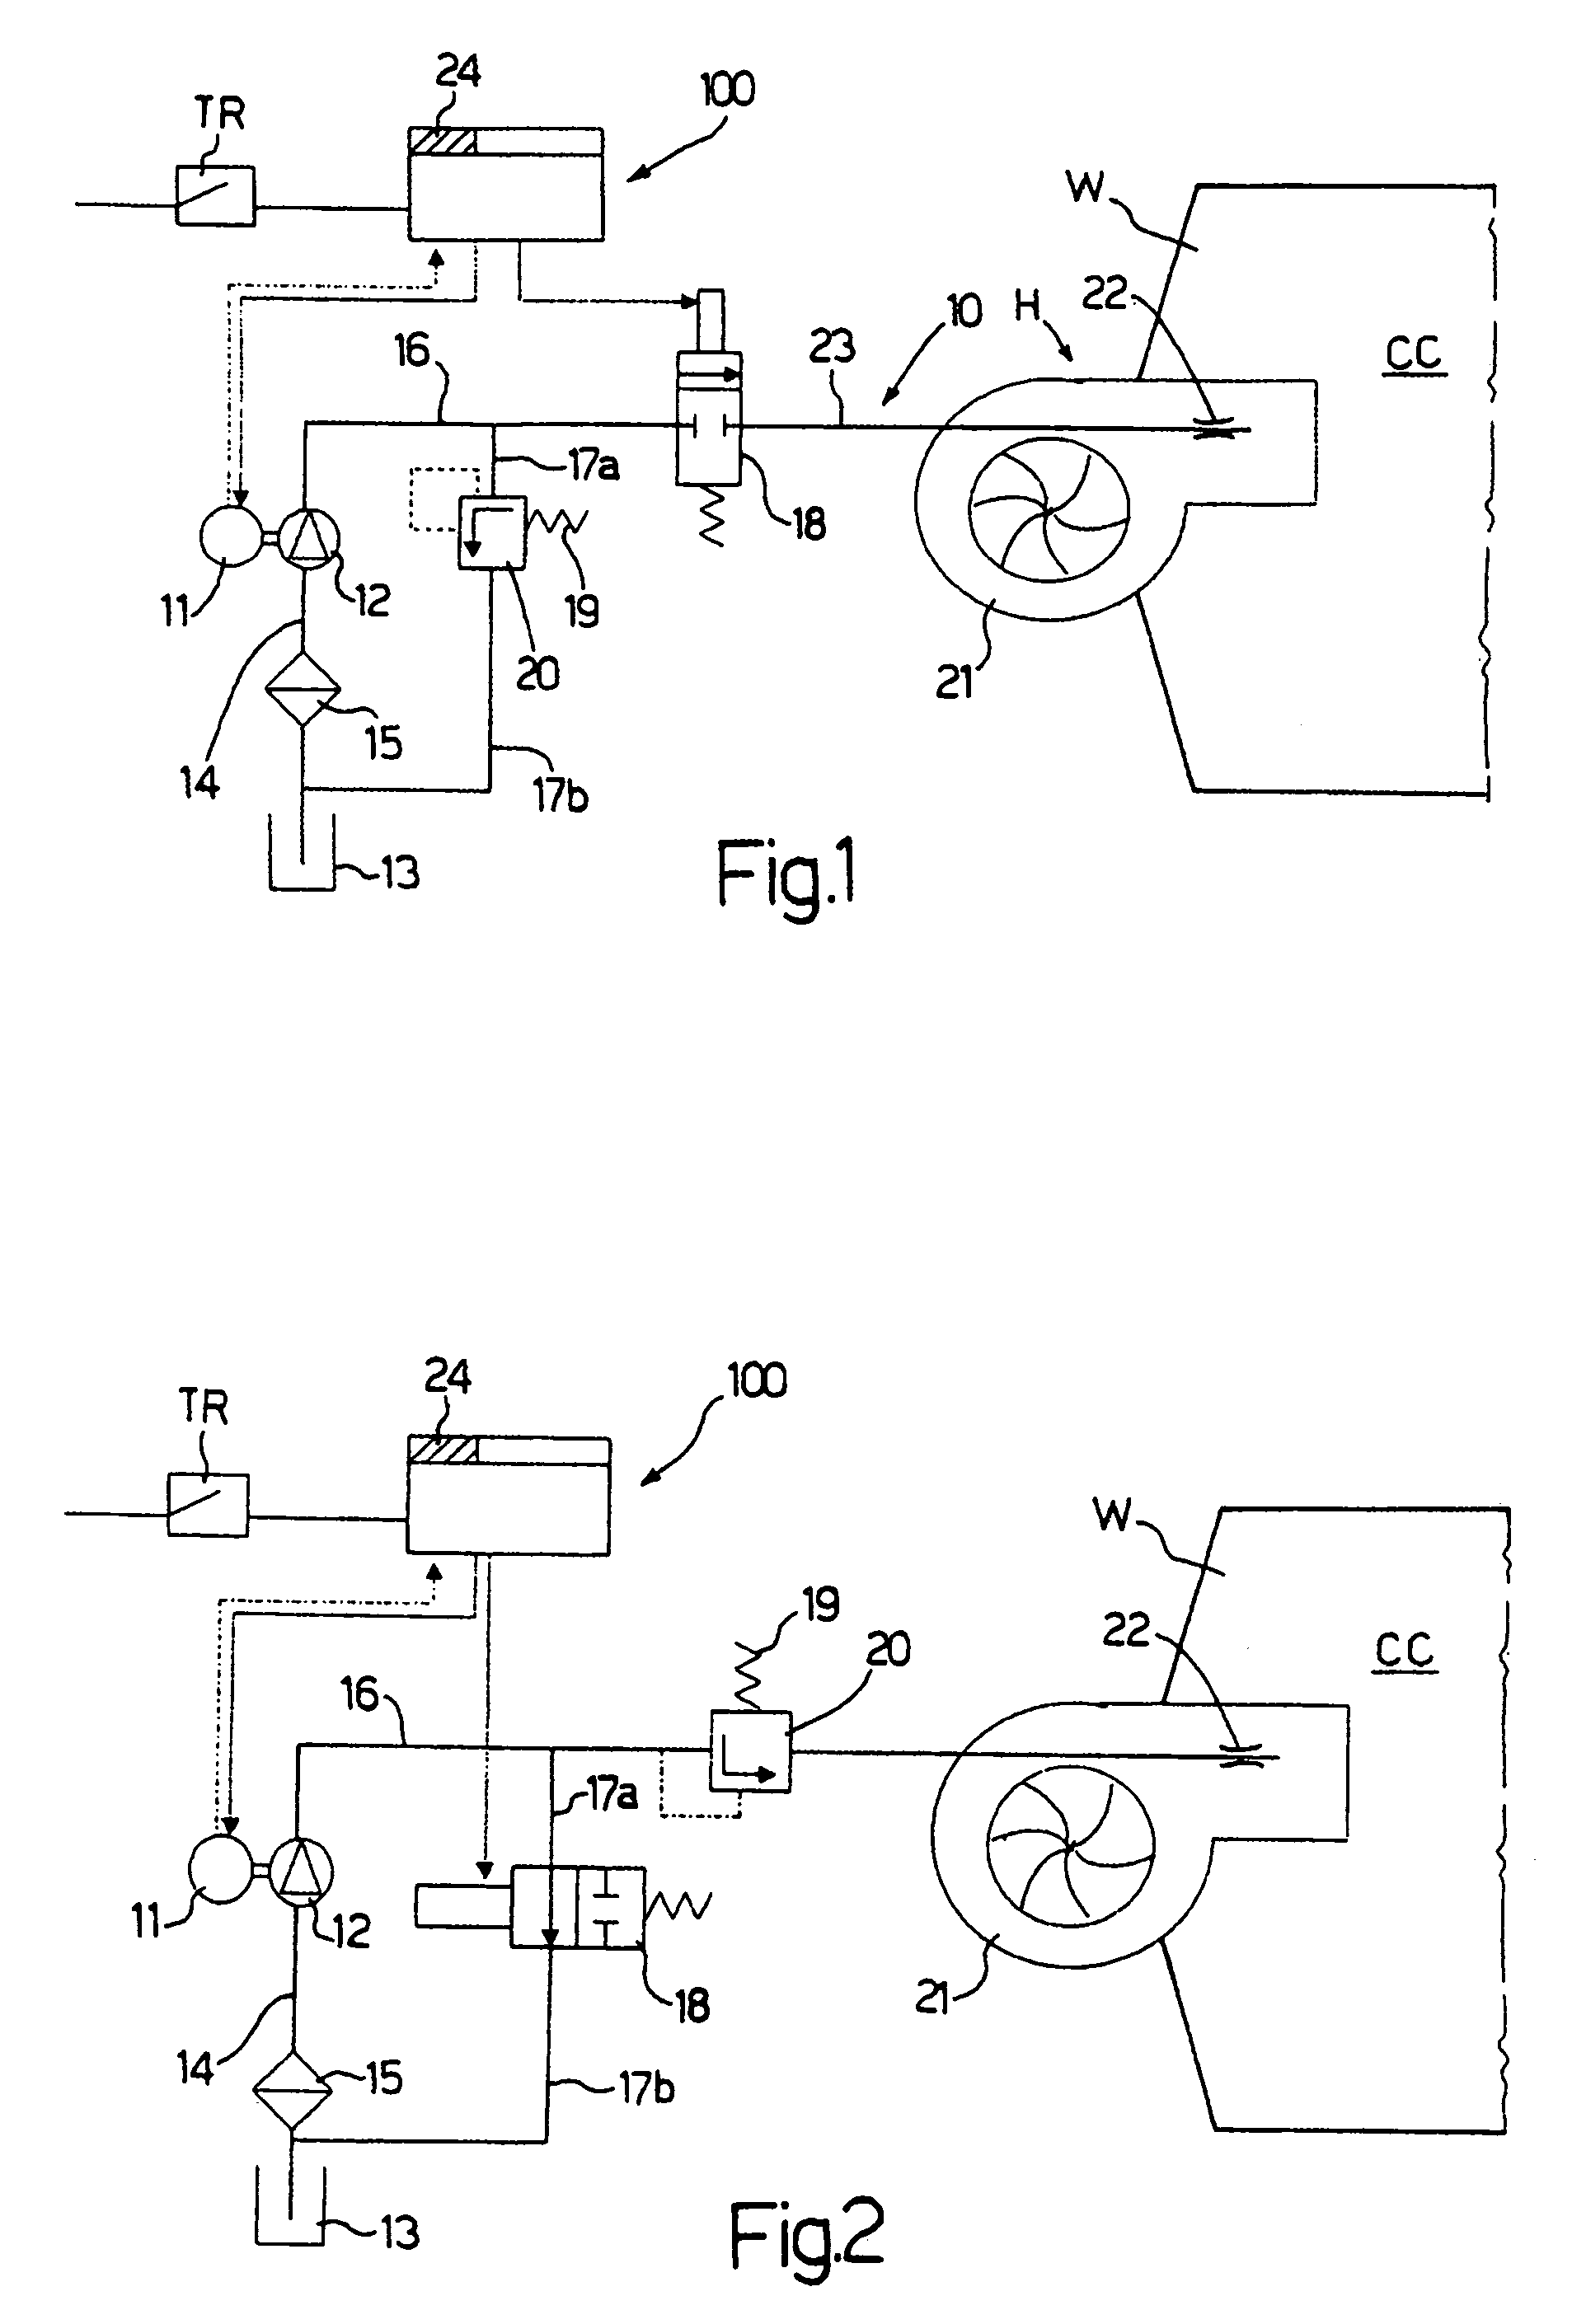 Method of controlling operation of a liquid-fuel combustion appliance